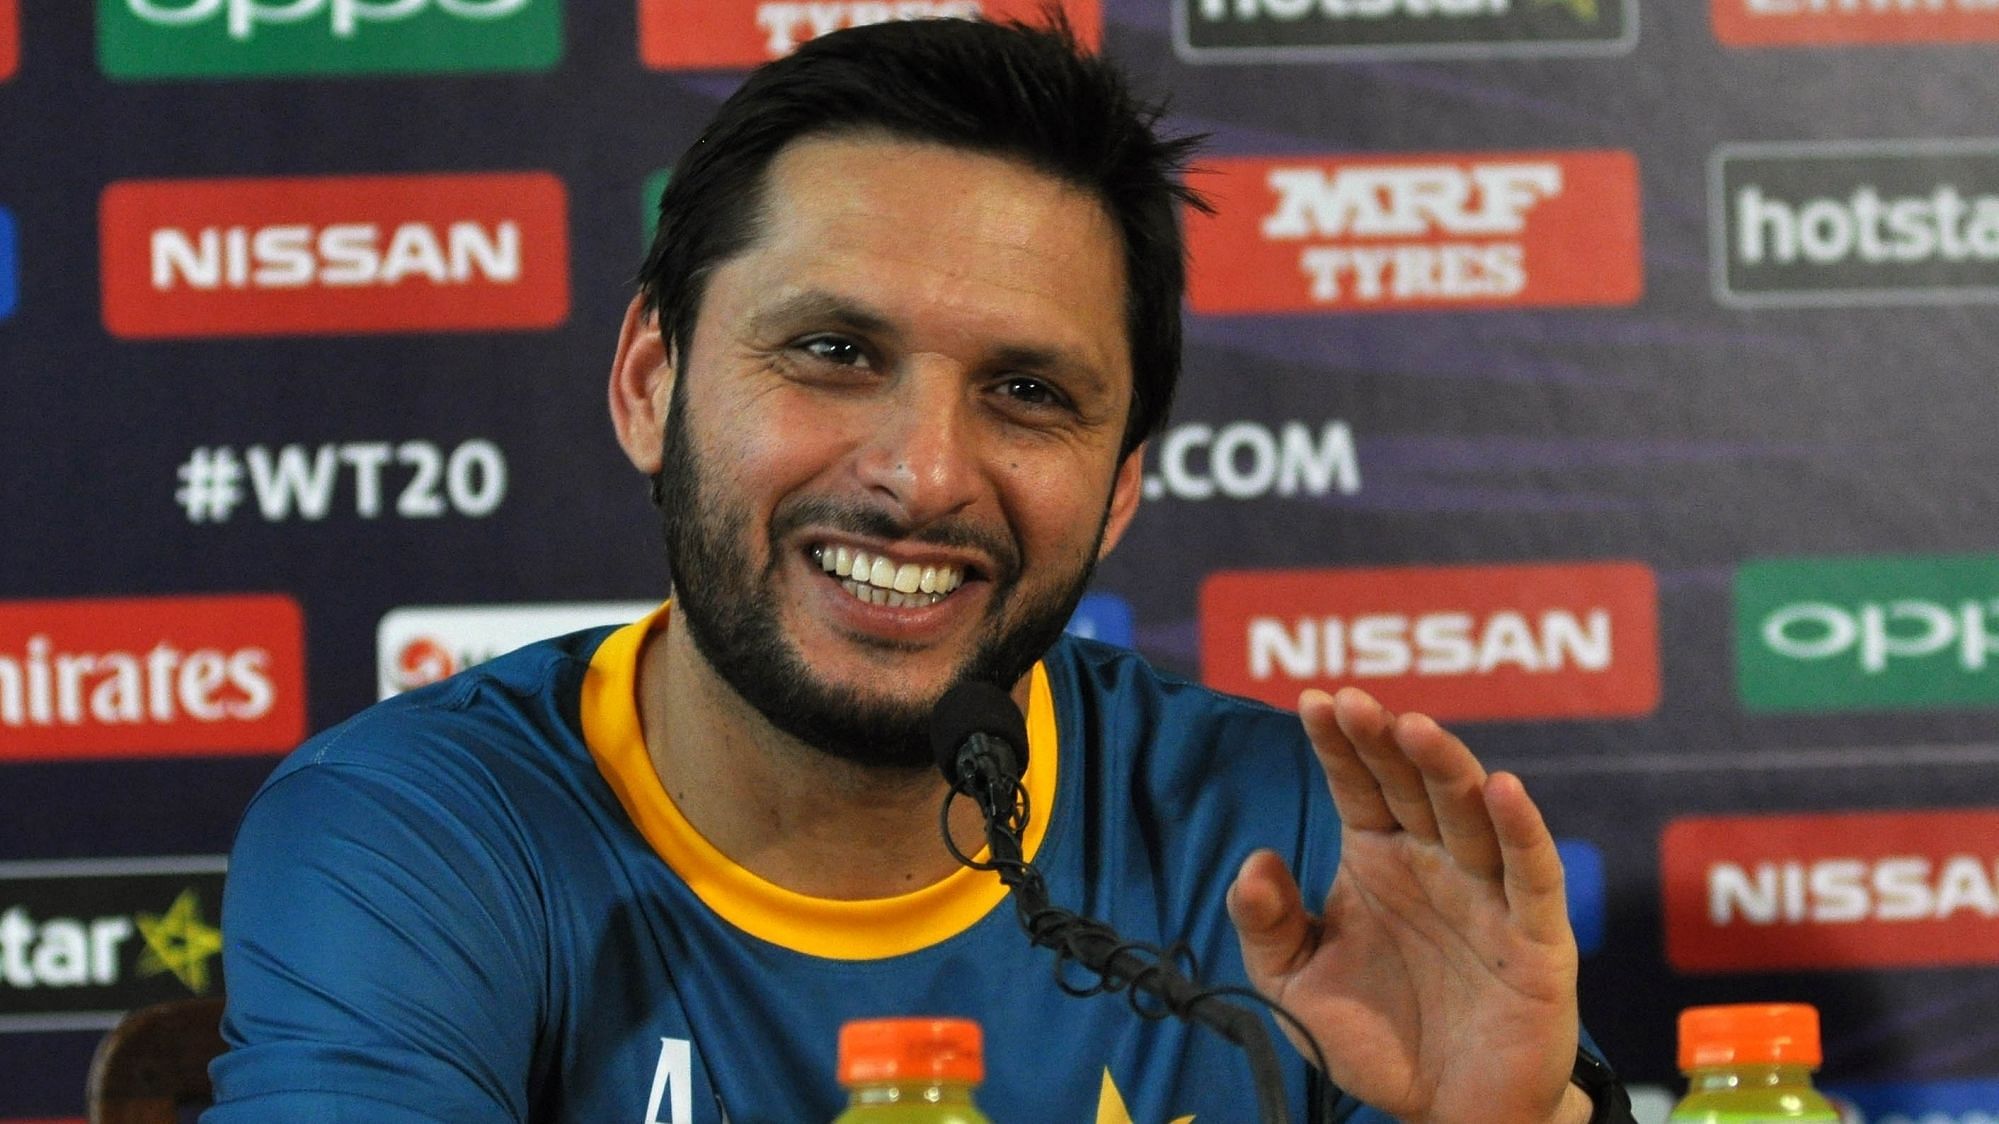 Shahid Afridi made the statement in an interview to Cricket Pakistan when asked if bilateral cricketing ties between India and Pakistan can resume.